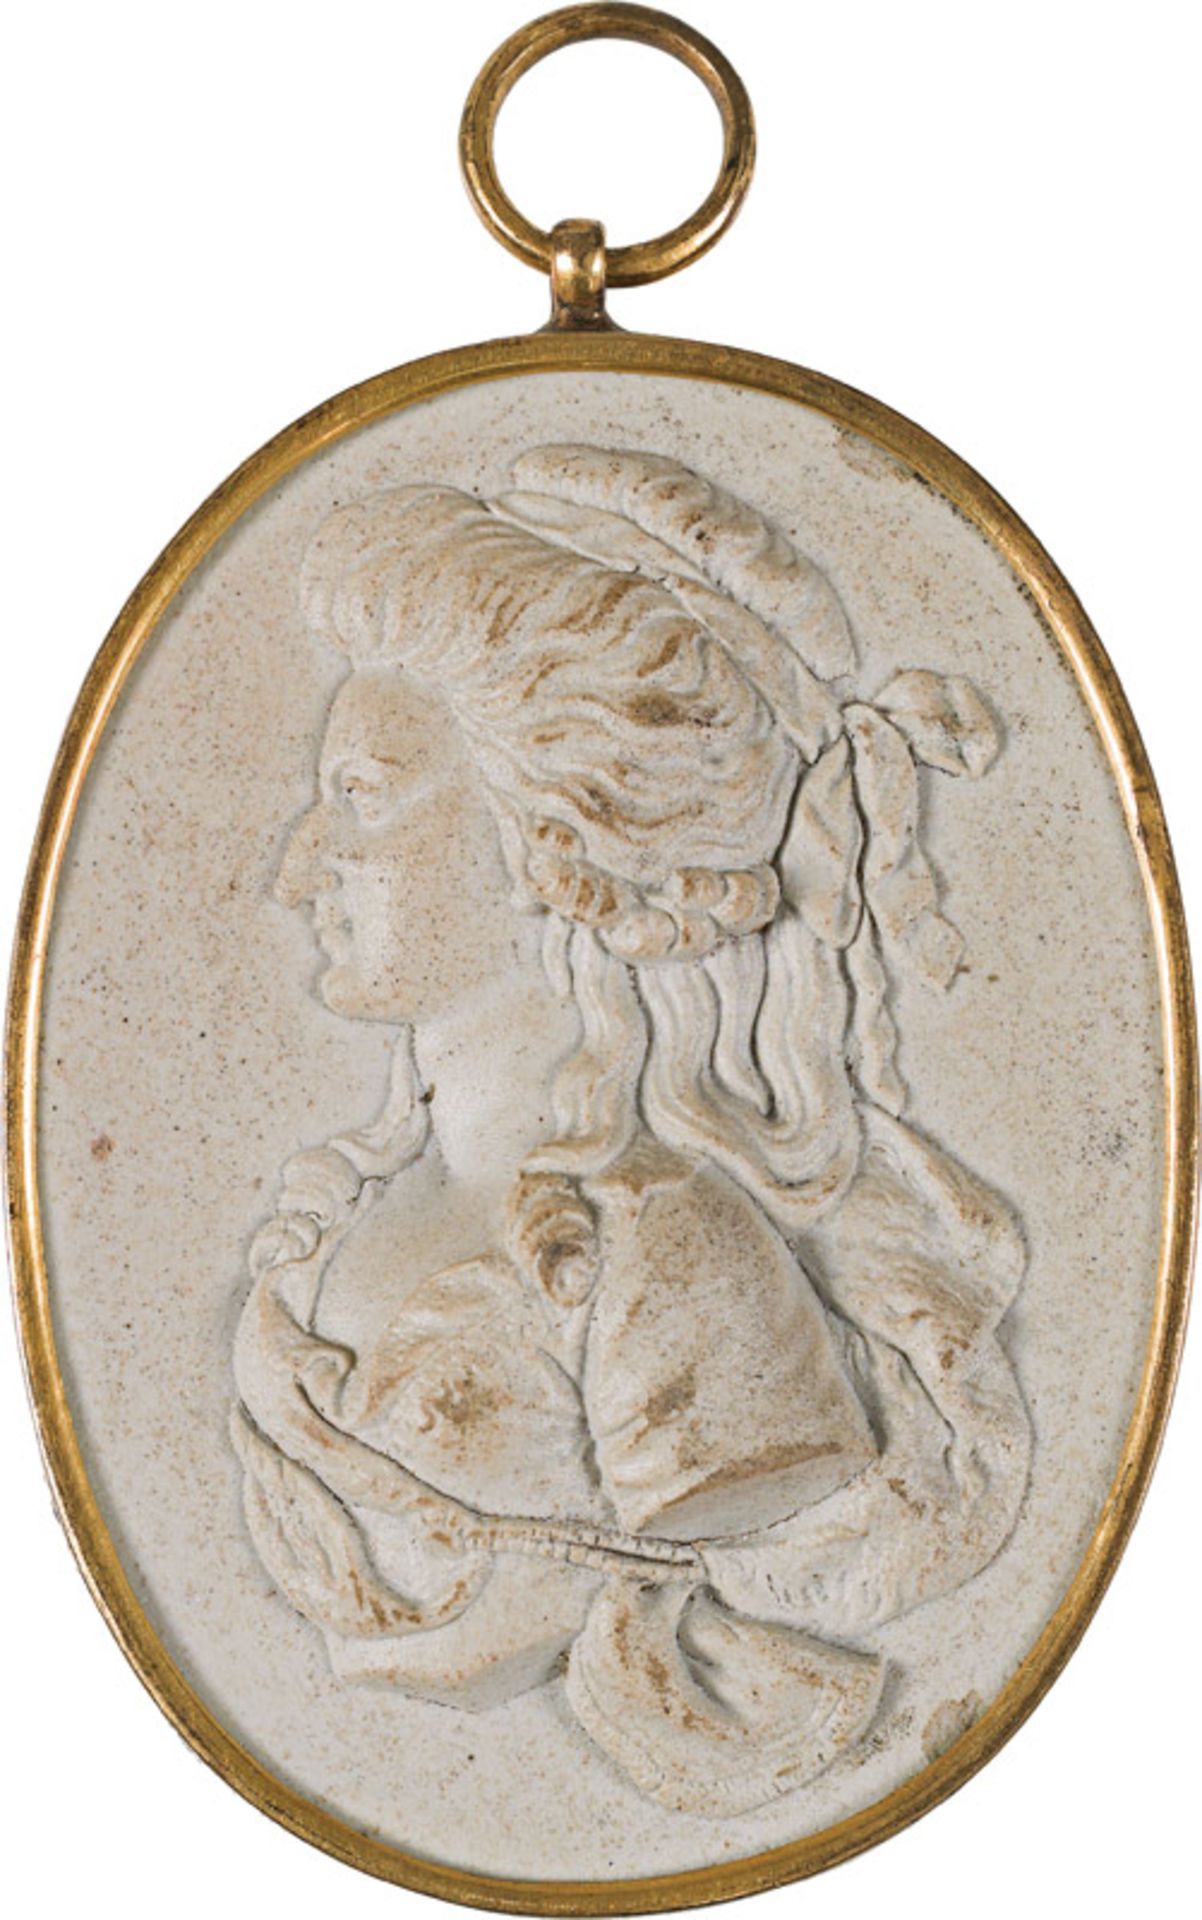 Bust of a woman, 18th century sepiolite; 9 × 6.4 cmViennese private collection Relief "